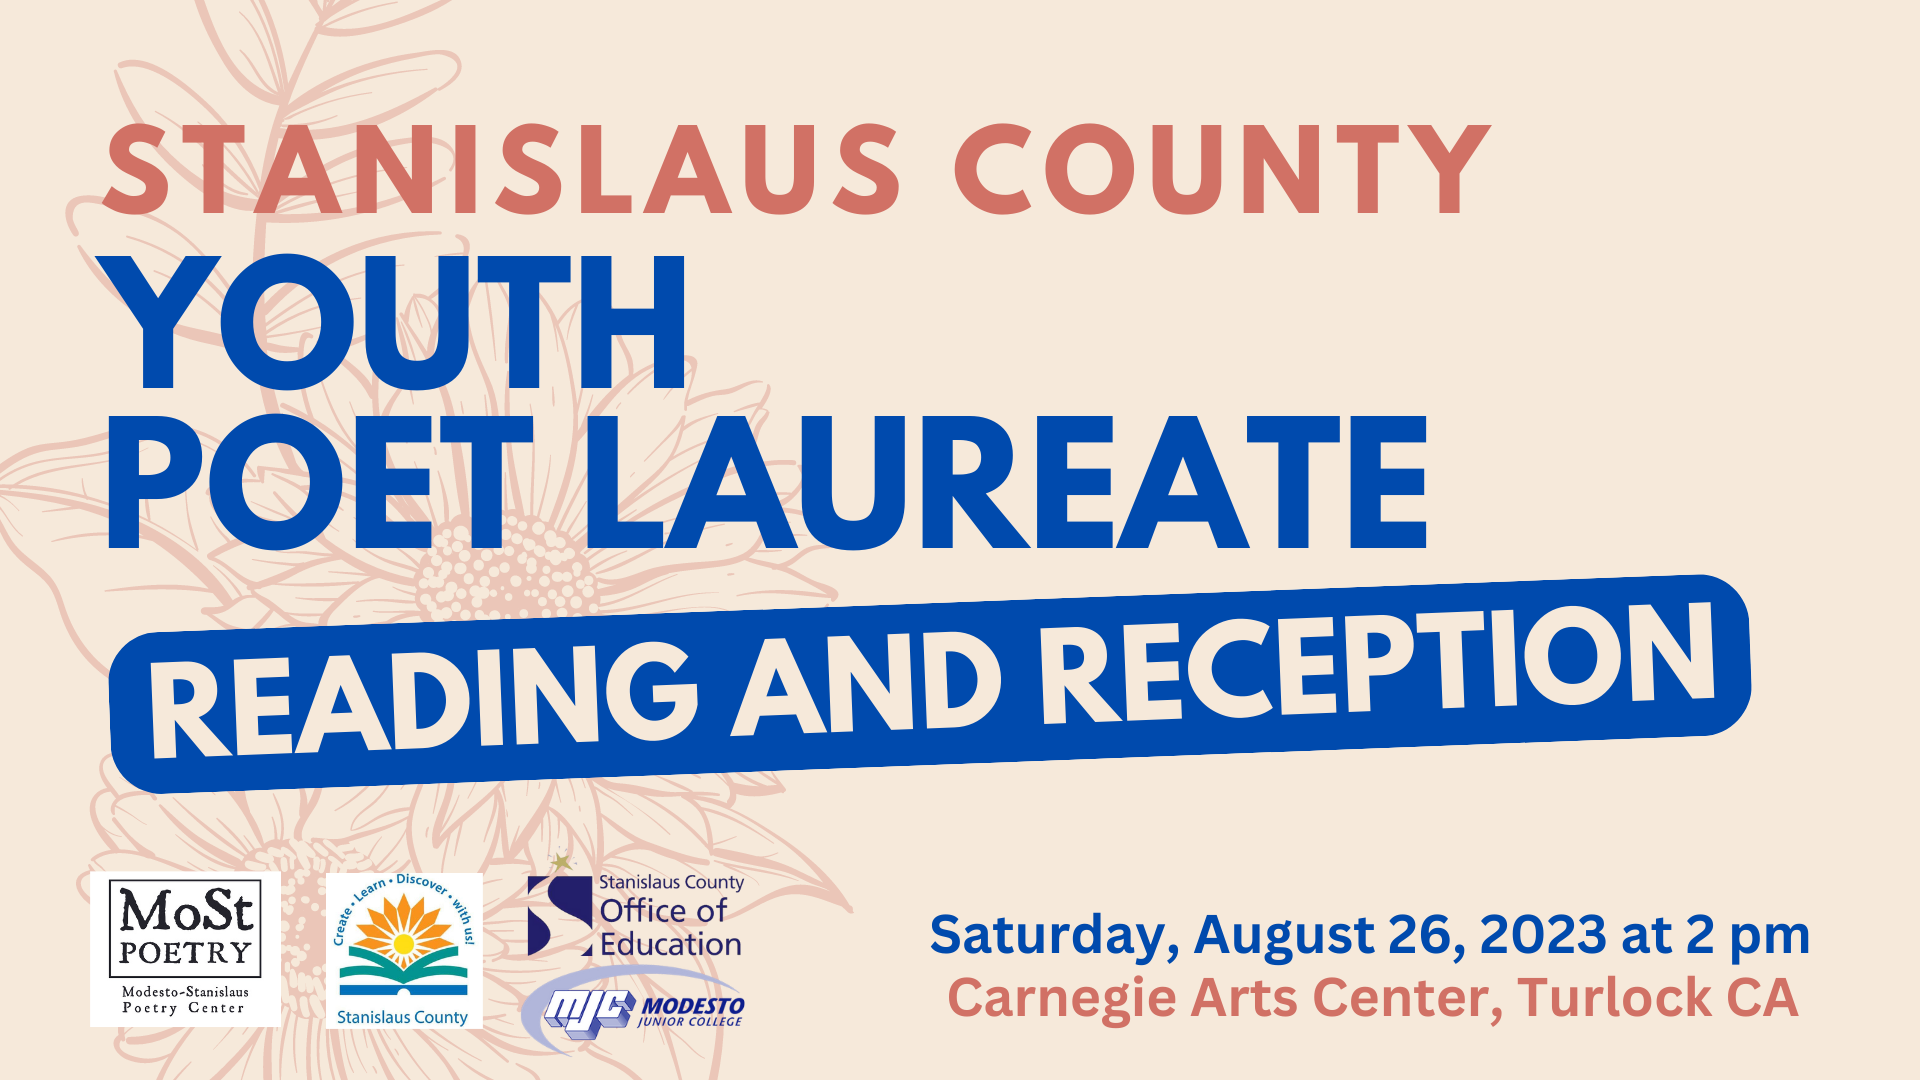 Stanislaus County Youth Poet Laureate Reading and Reception, Saturday August 26, 2023, at 2 pm. Location: Carnegie Arts Center, Turlock